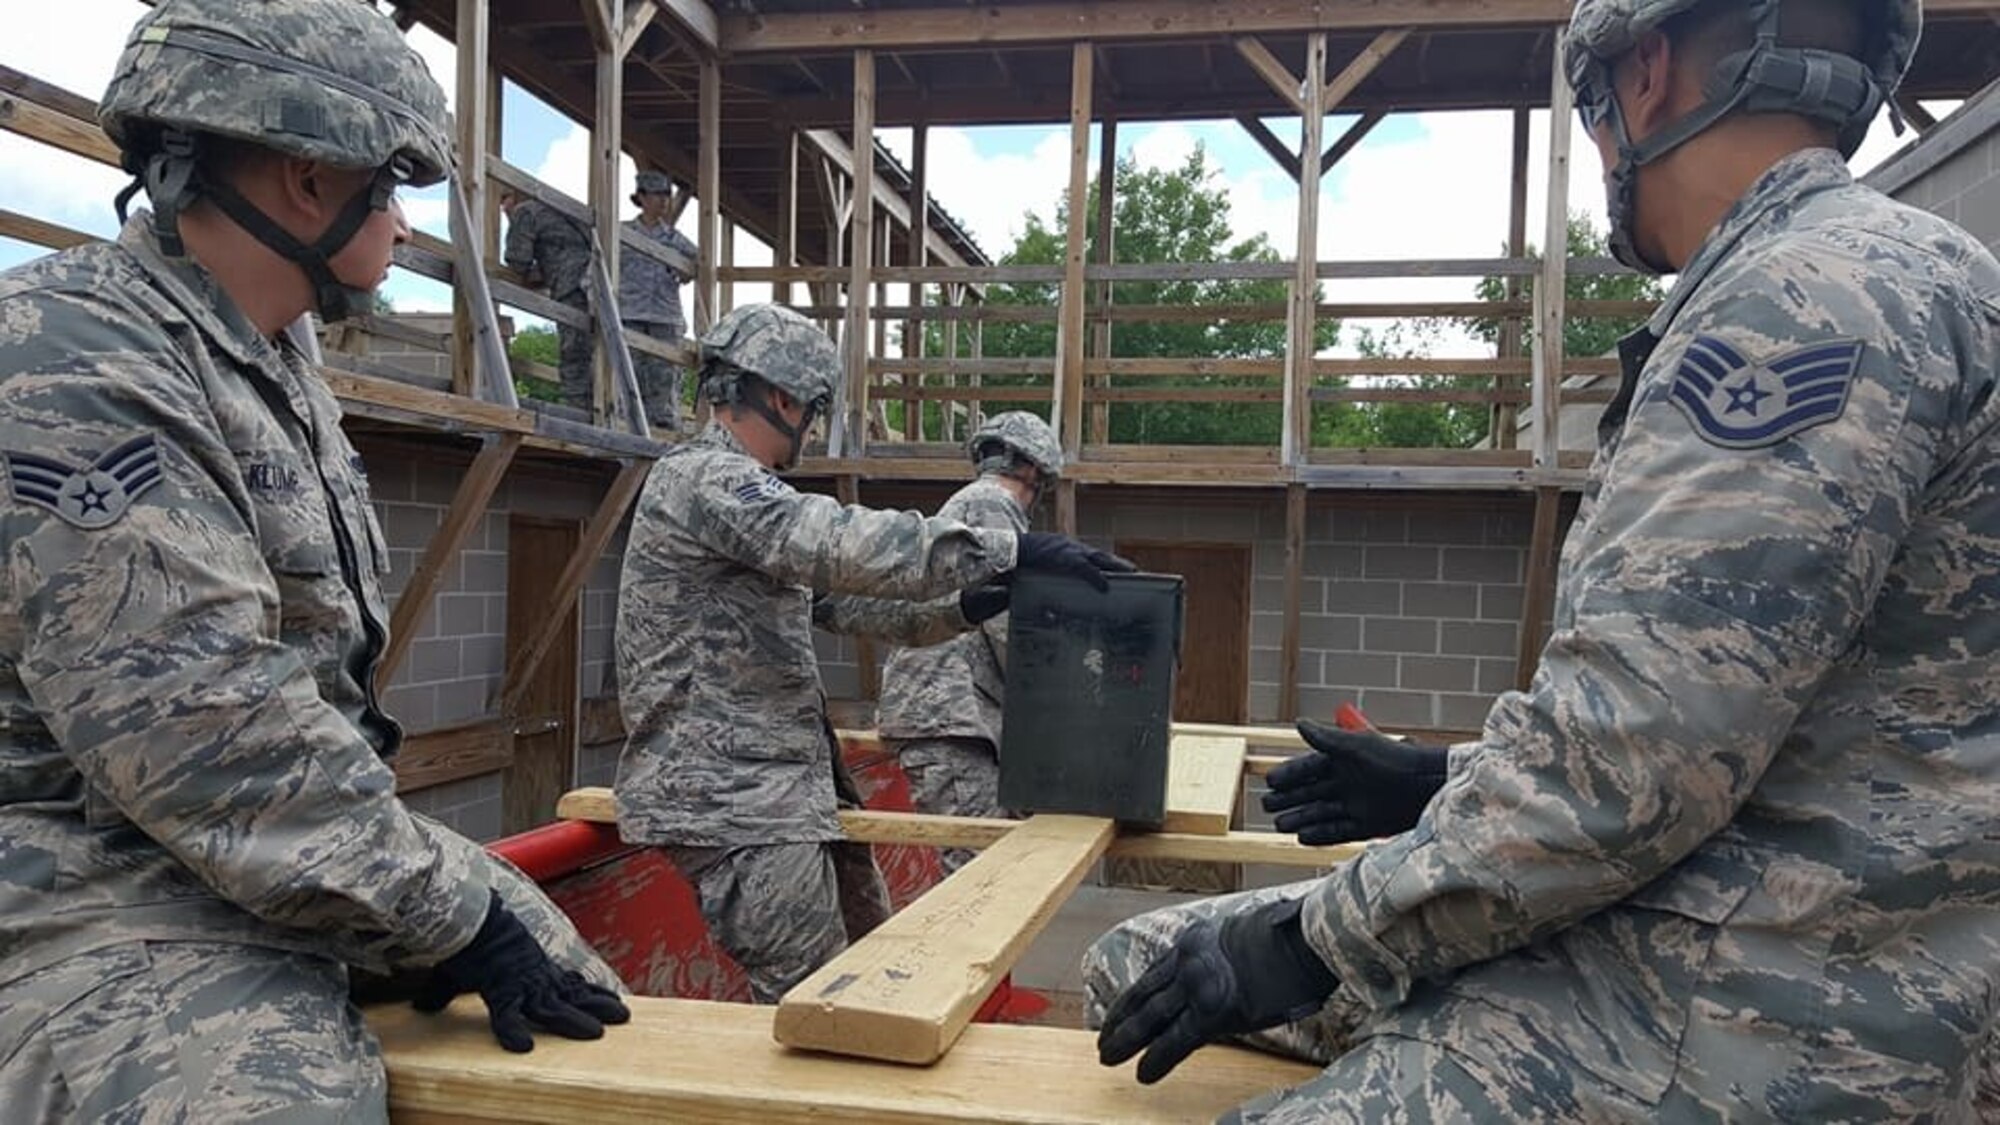 Members of the 934th Security Forces Squadron negotiate the Leadership Reaction Course at Camp Ripley, Minn. June 19 as part of their annual training. (Photo courtesy of Camp Ripley)